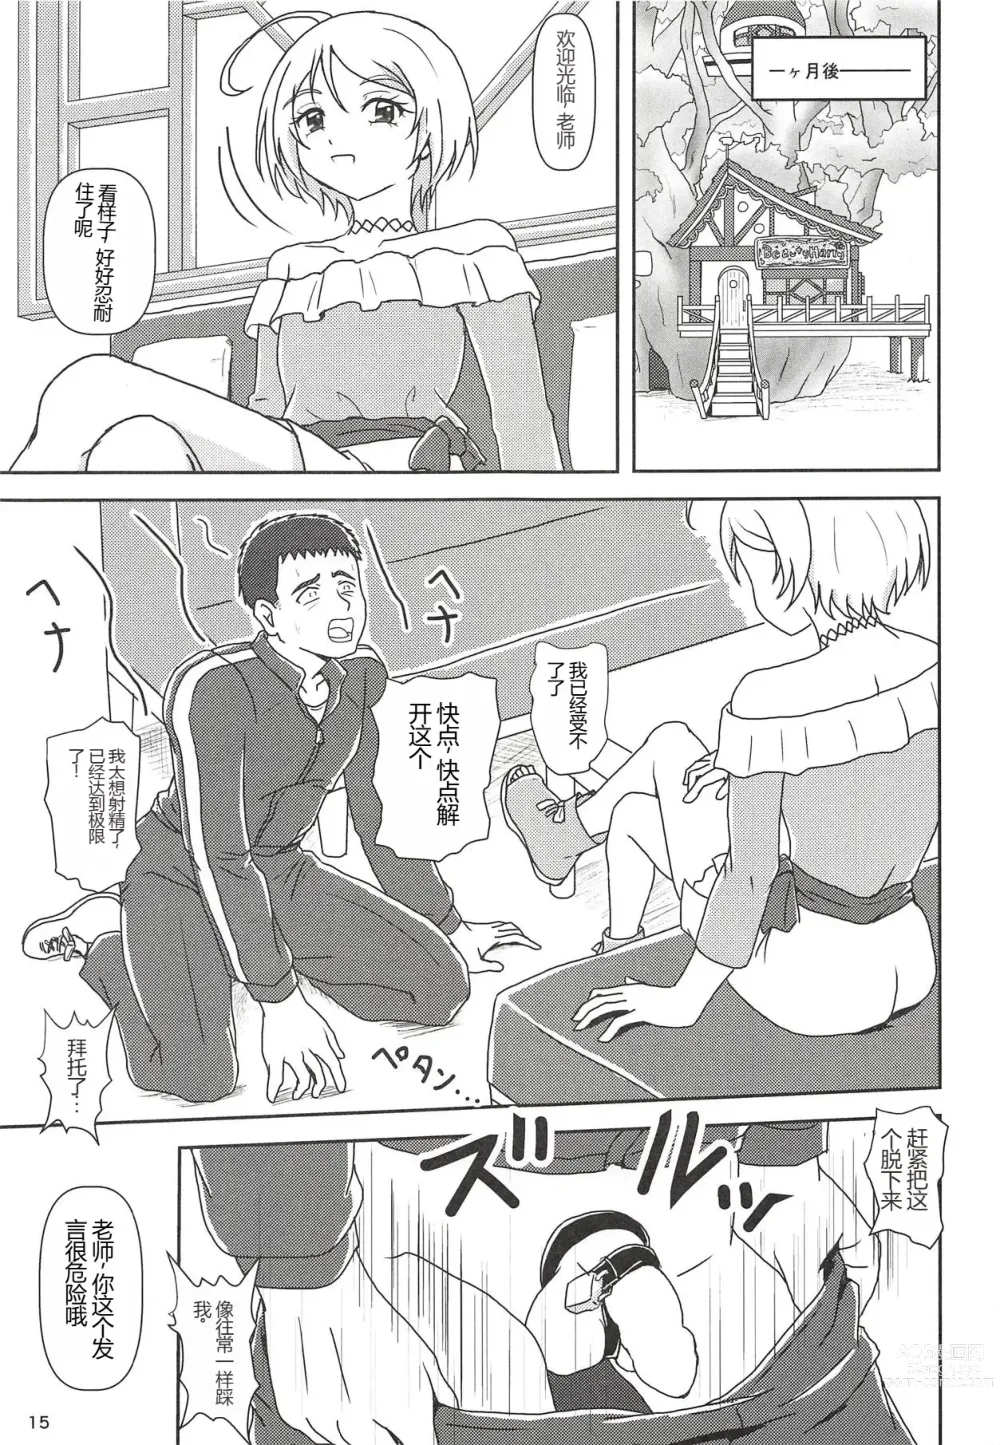 Page 14 of doujinshi Hugtto! Zuricure